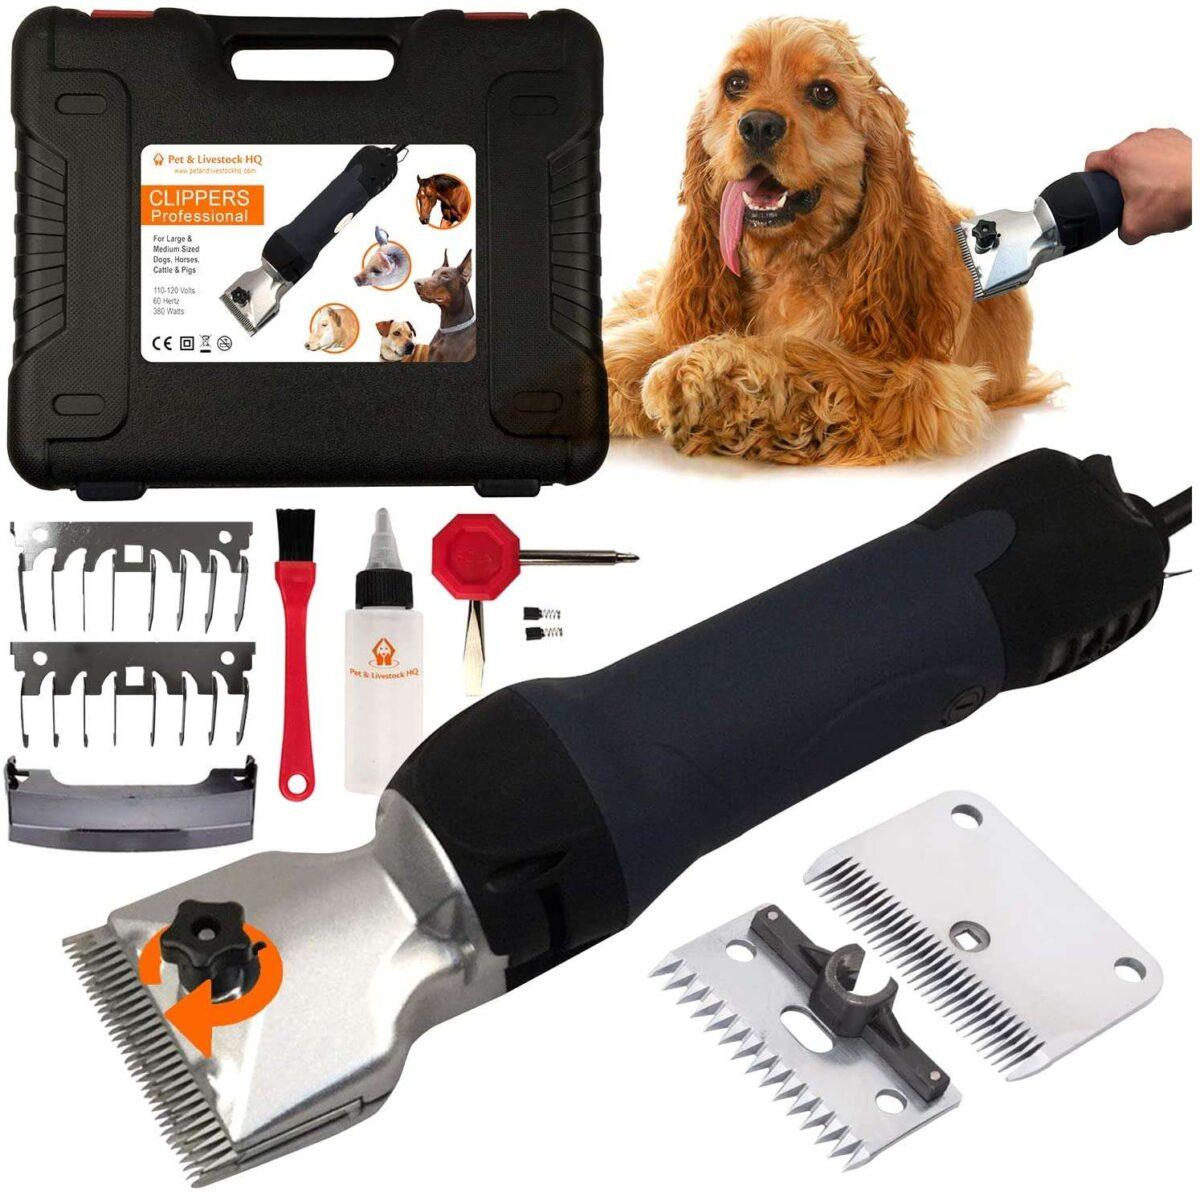 Top 5 Best dog grooming clippers Globalpetblog